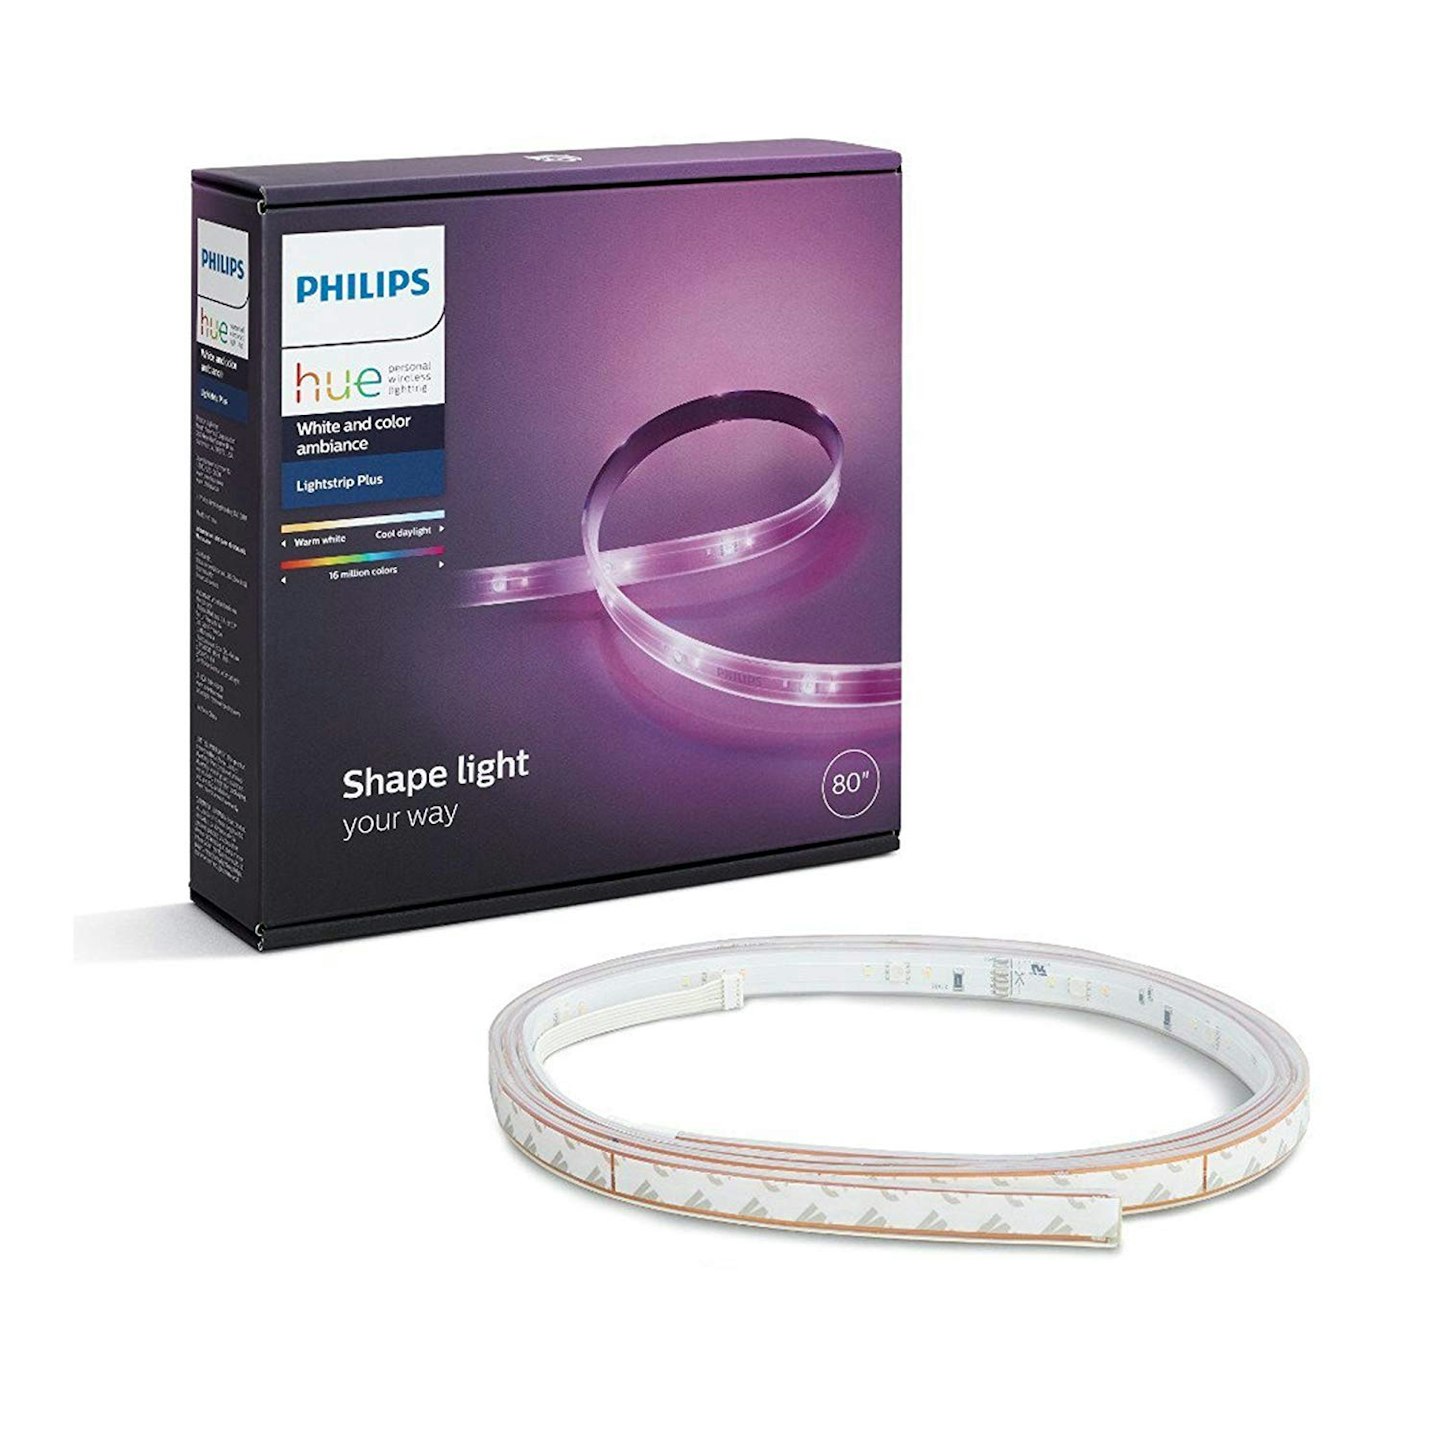 Phillips Hue White and colour ambiance Lightstrip Plus 2m, £64